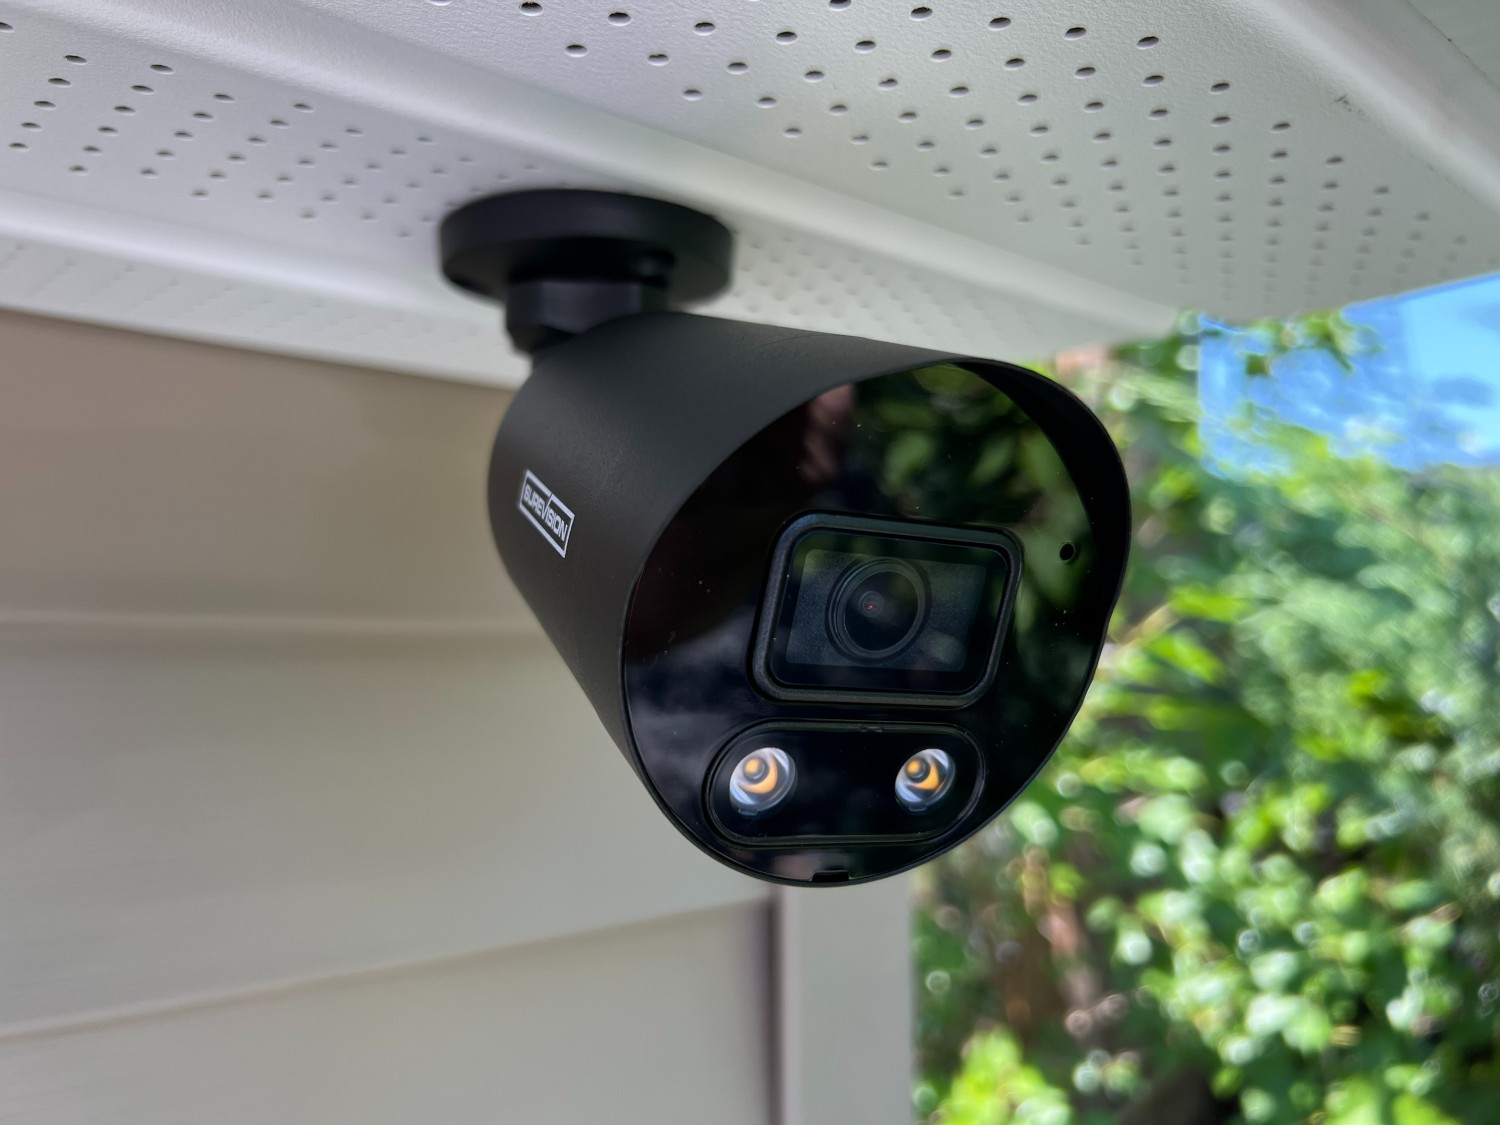 Should Security Cameras be Visible? The Value of Deterrence